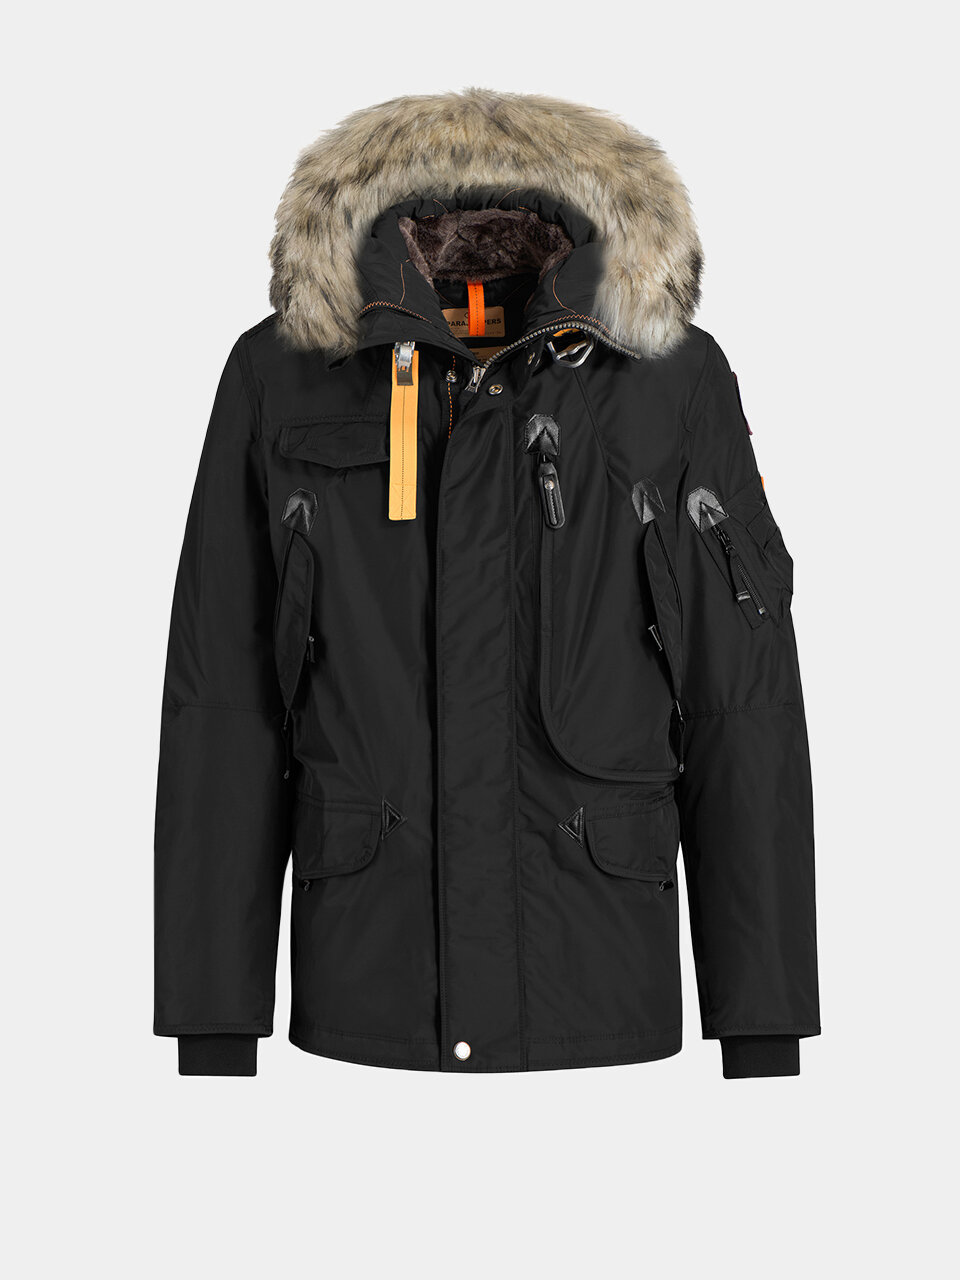 Parajumpers - Masterpiece Right Hand Man's Parka